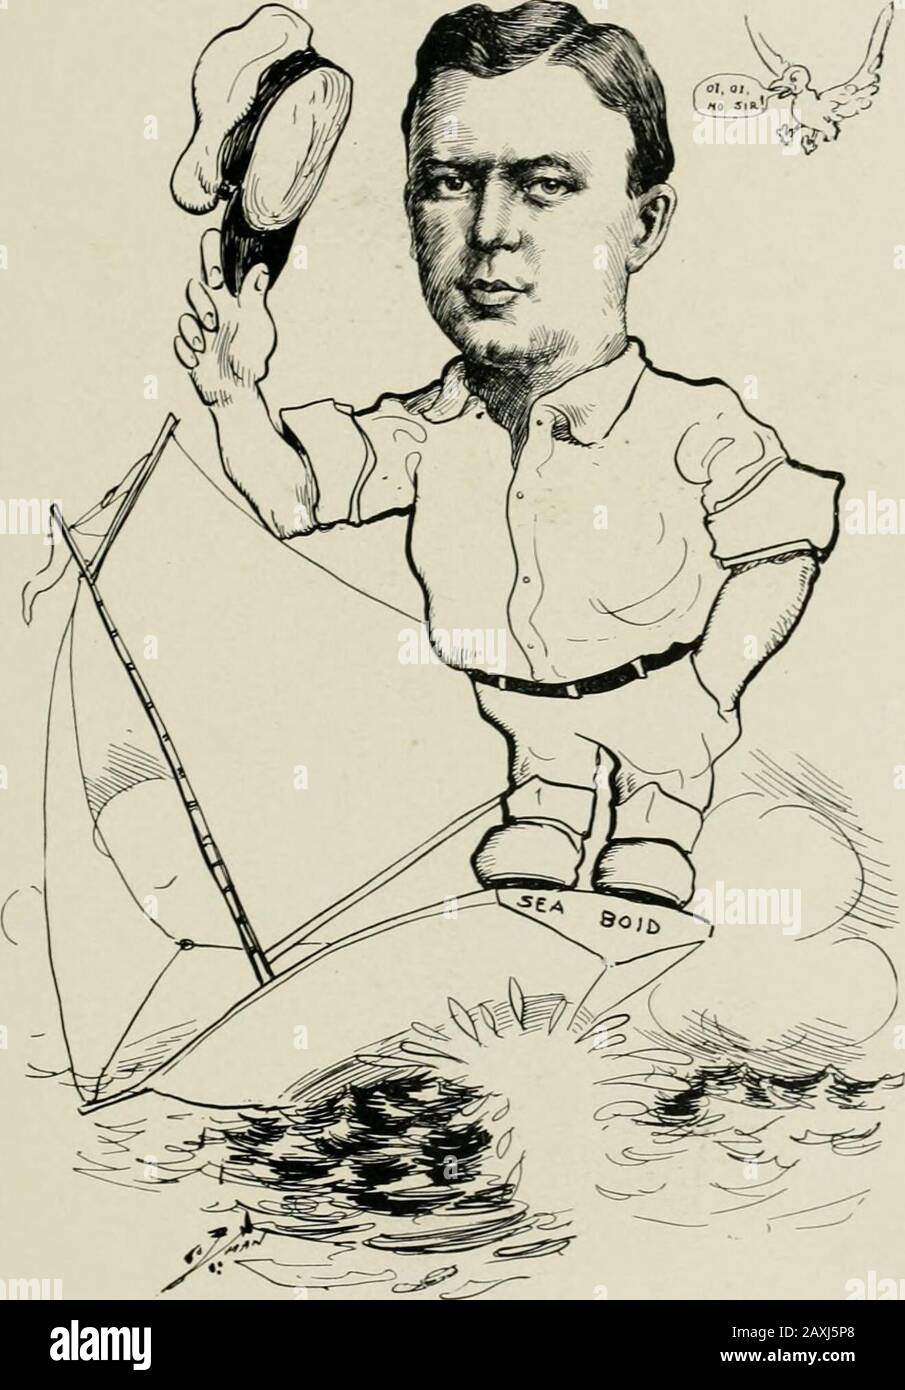 'As we see 'em,' a volume of cartoons and caricatures of Los Angeles citizens . F. B. ELBERSON,President Meek Baking Co.. EVAN G. EVAXS,President Hollywood Candy Co., Vice-Commodore South Coast Yacht Club. Stock Photo